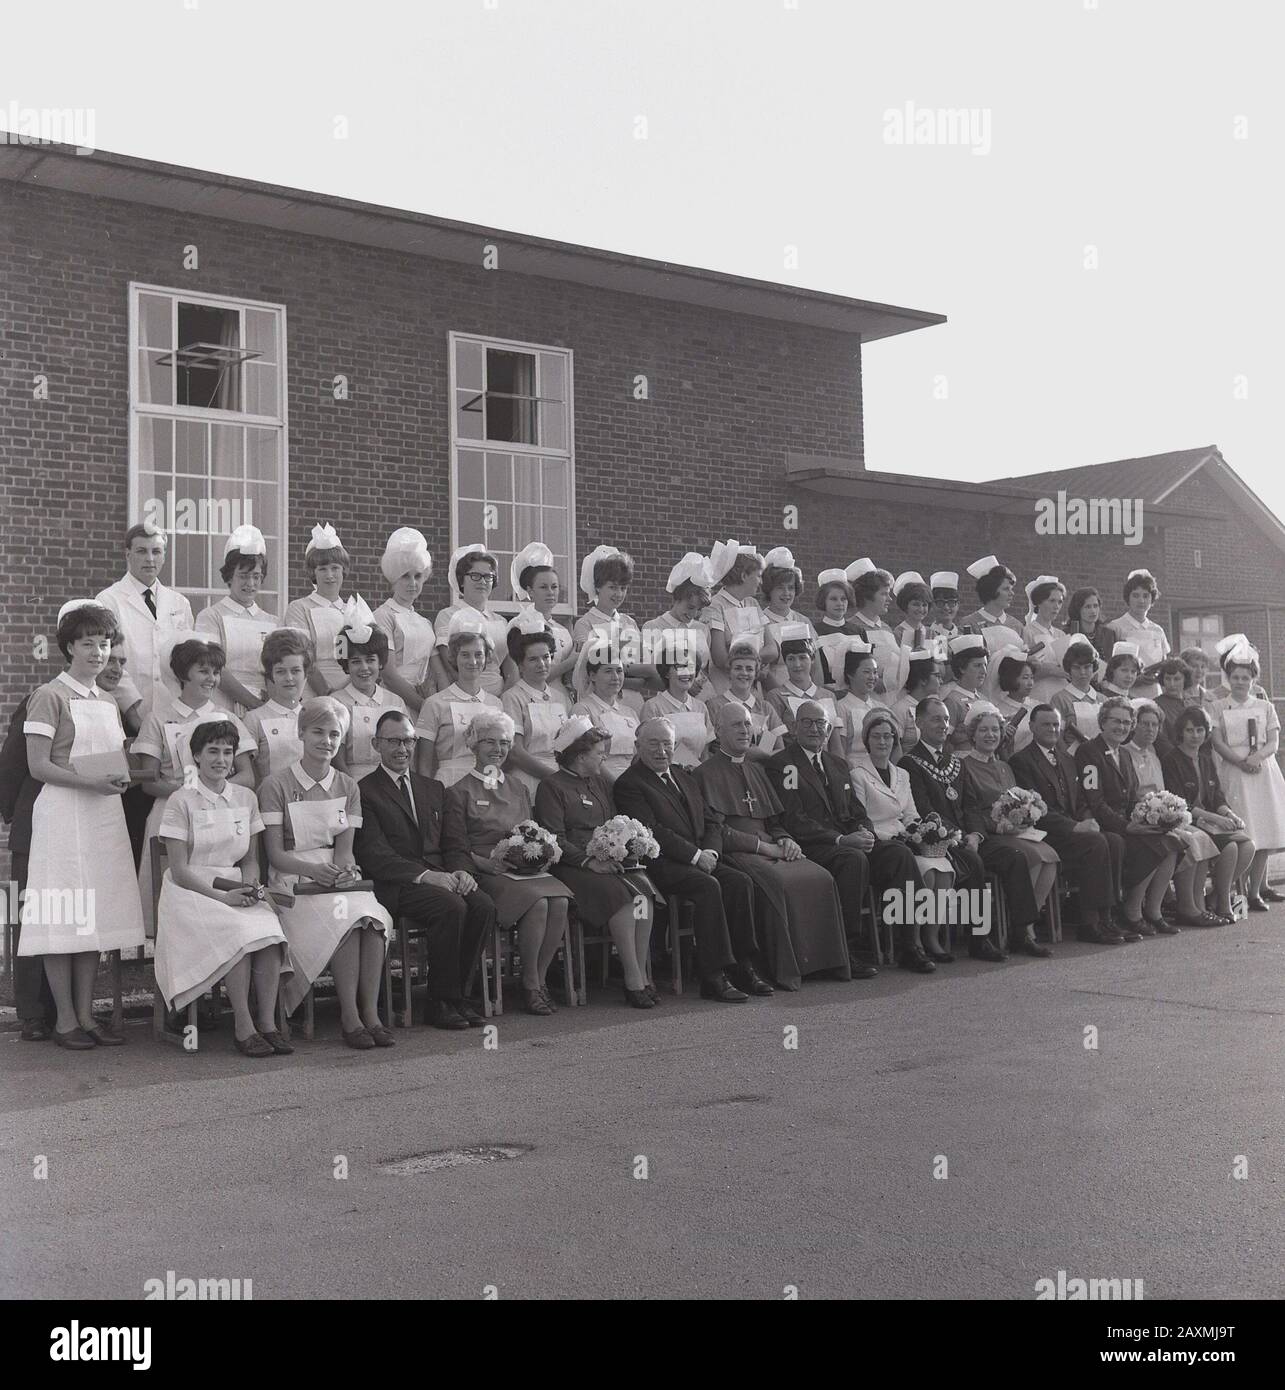 1965, historical, group photo of newly qualified nurses in their uniforms, senior nursing staff, priest and other local dignitaries, outside Stoke Mandeville Hospital, Bucks, England, UK. The origins of the hospital, which in 1944 saw the establishment of the National Spinal Injuries Centre there, came from the cholera epidemic that swept England in the 1830s. Stock Photo